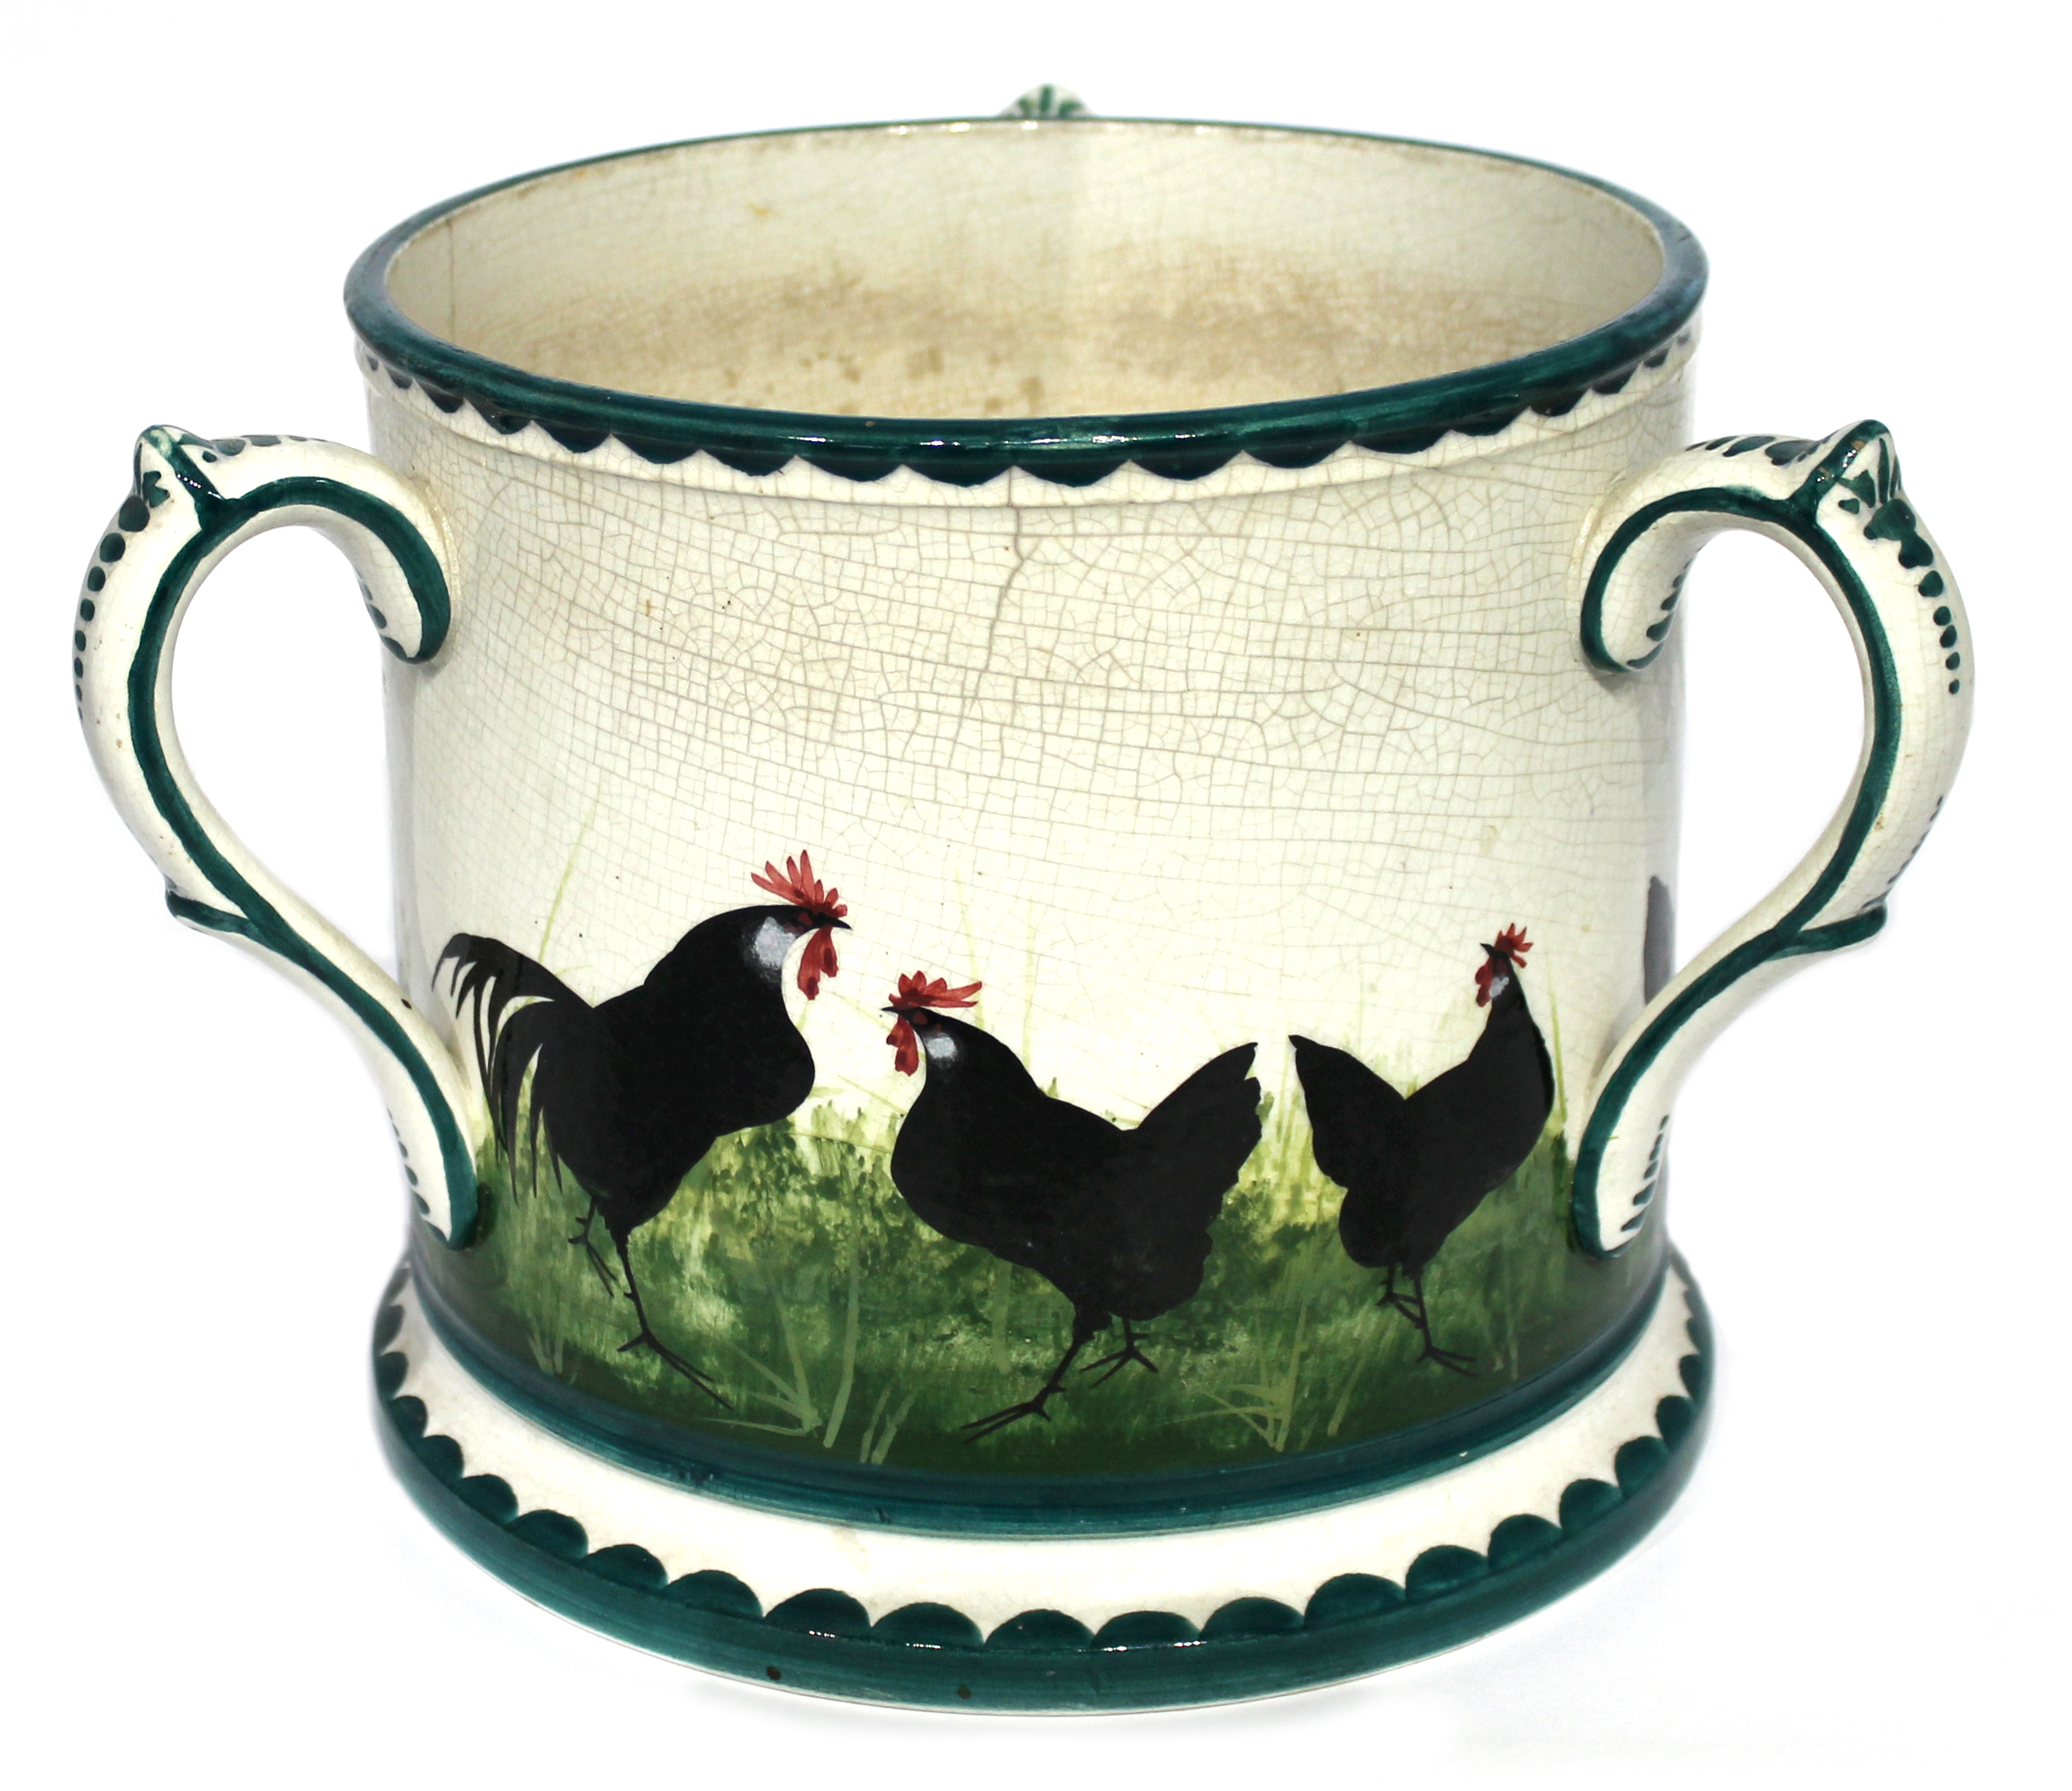 A Wemyss ware pottery tyg, c.1900, decorated with a band of hens, retailed by T G Goode and Co., (